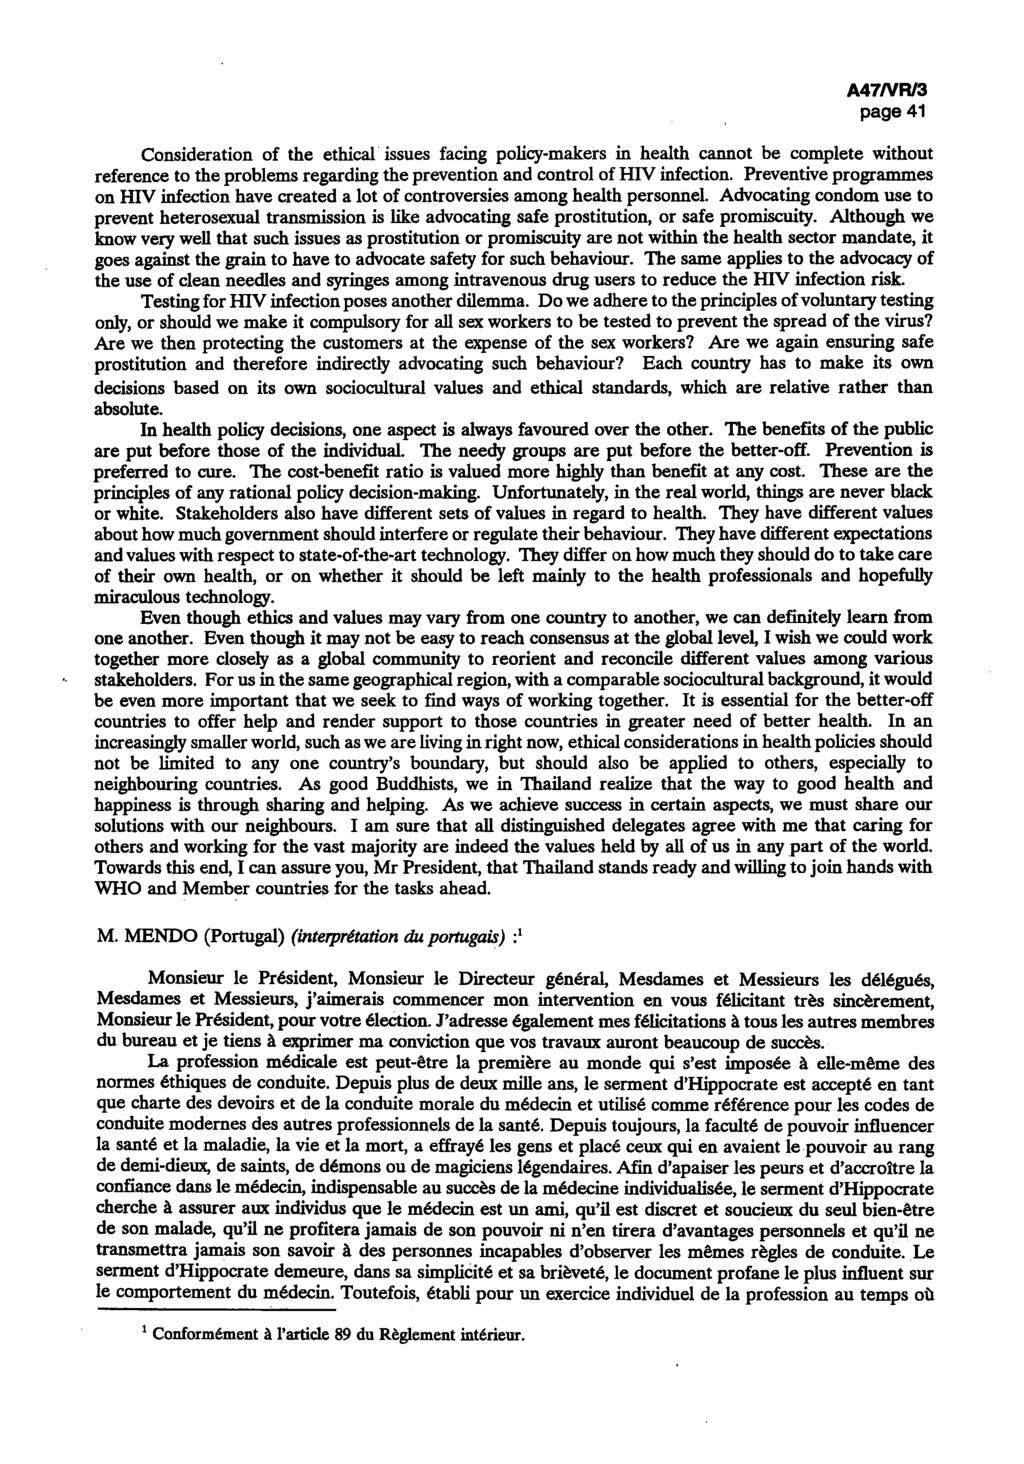 A47/VR/2 page 41 Consideration of the ethical issues facing policy-makers in health cannot be complete without reference to the problems regarding the prevention and control of HIV infection.